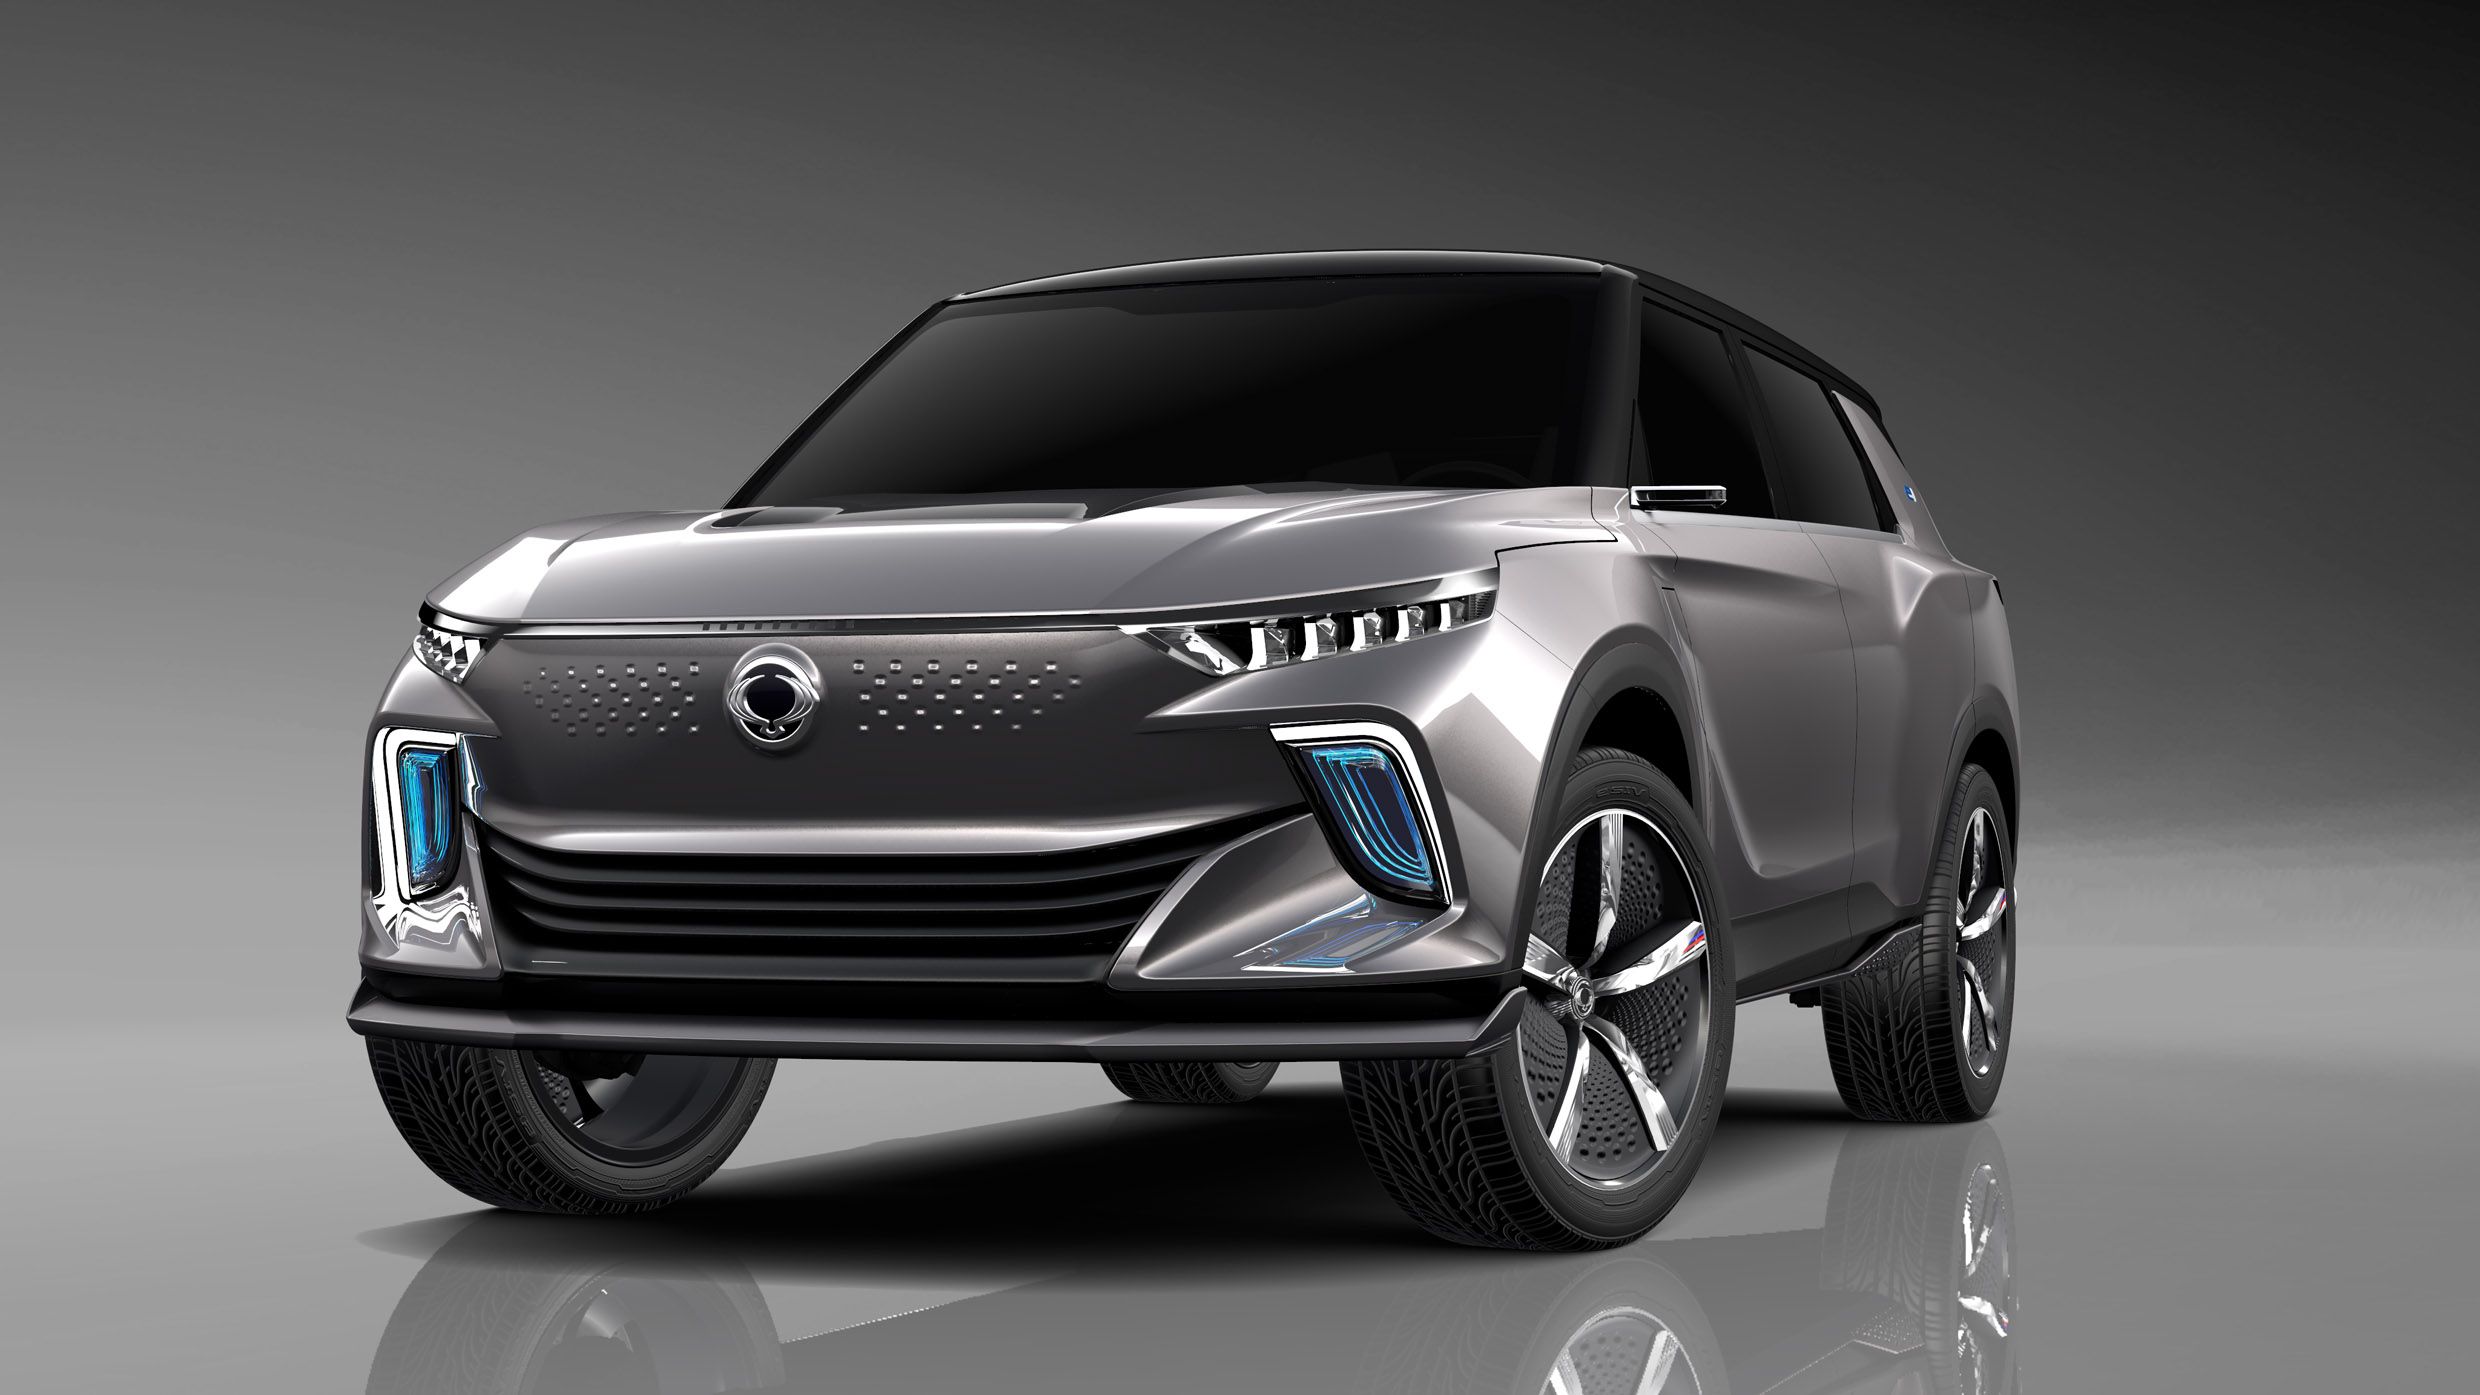 2019 The e-SIV EV Shows what SSanYong is Capable of but Leaves a lot to be Desired